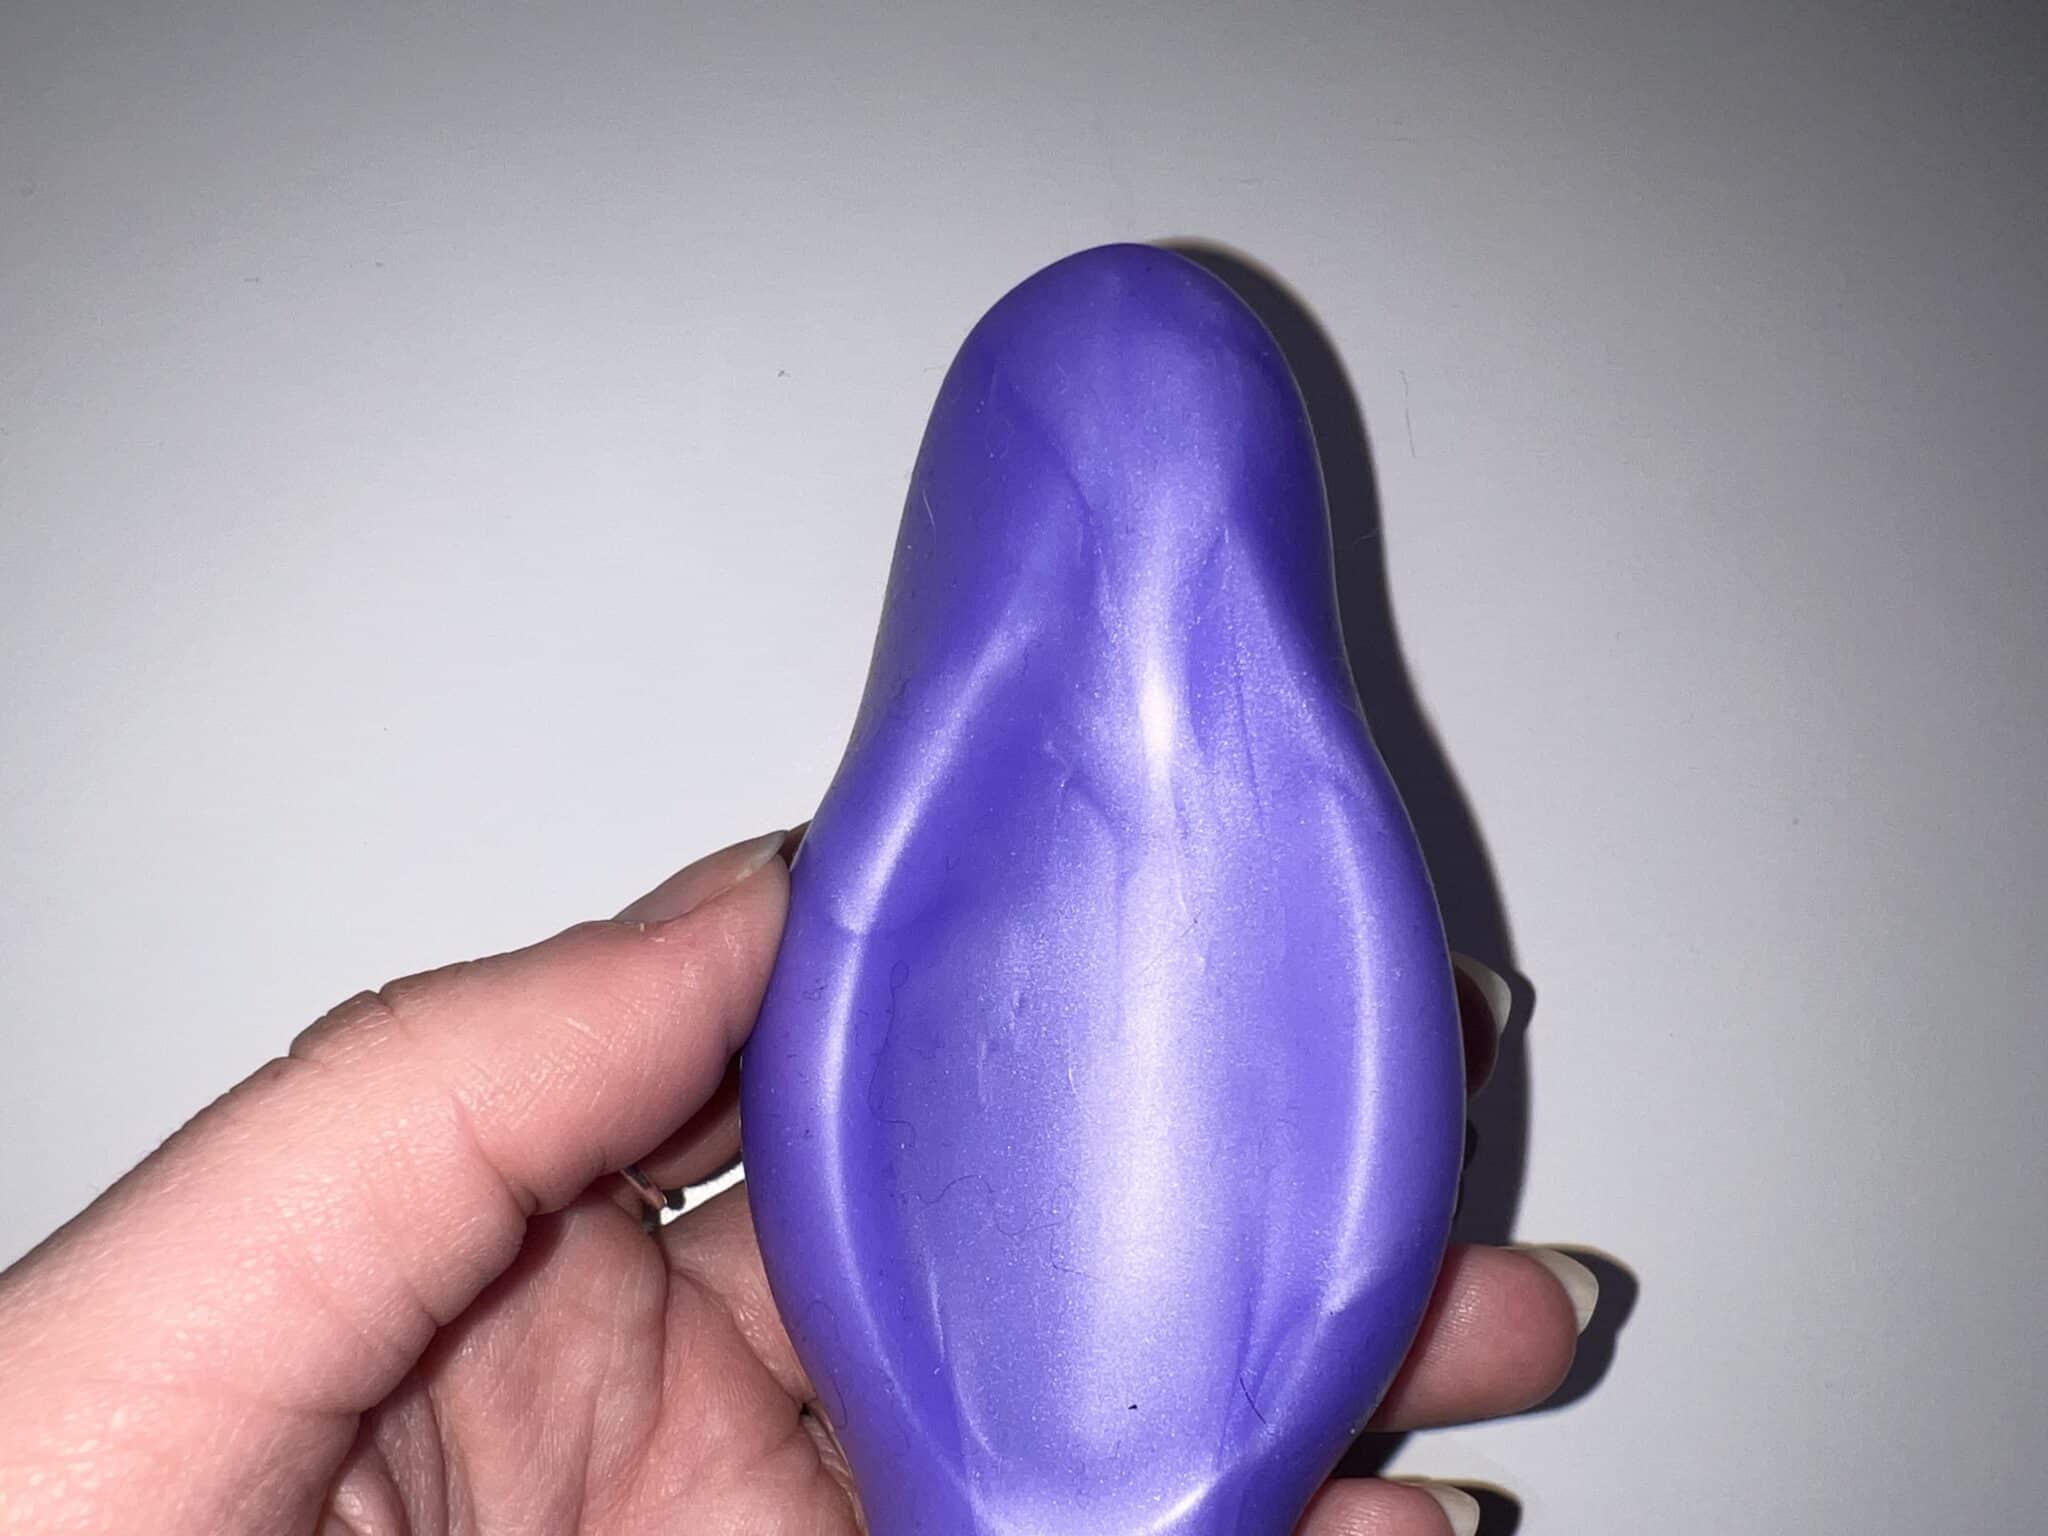 SquarePegToys G Squeeze Vaginal Plug How is the SquarePegToys G Squeeze Vaginal Plug designed